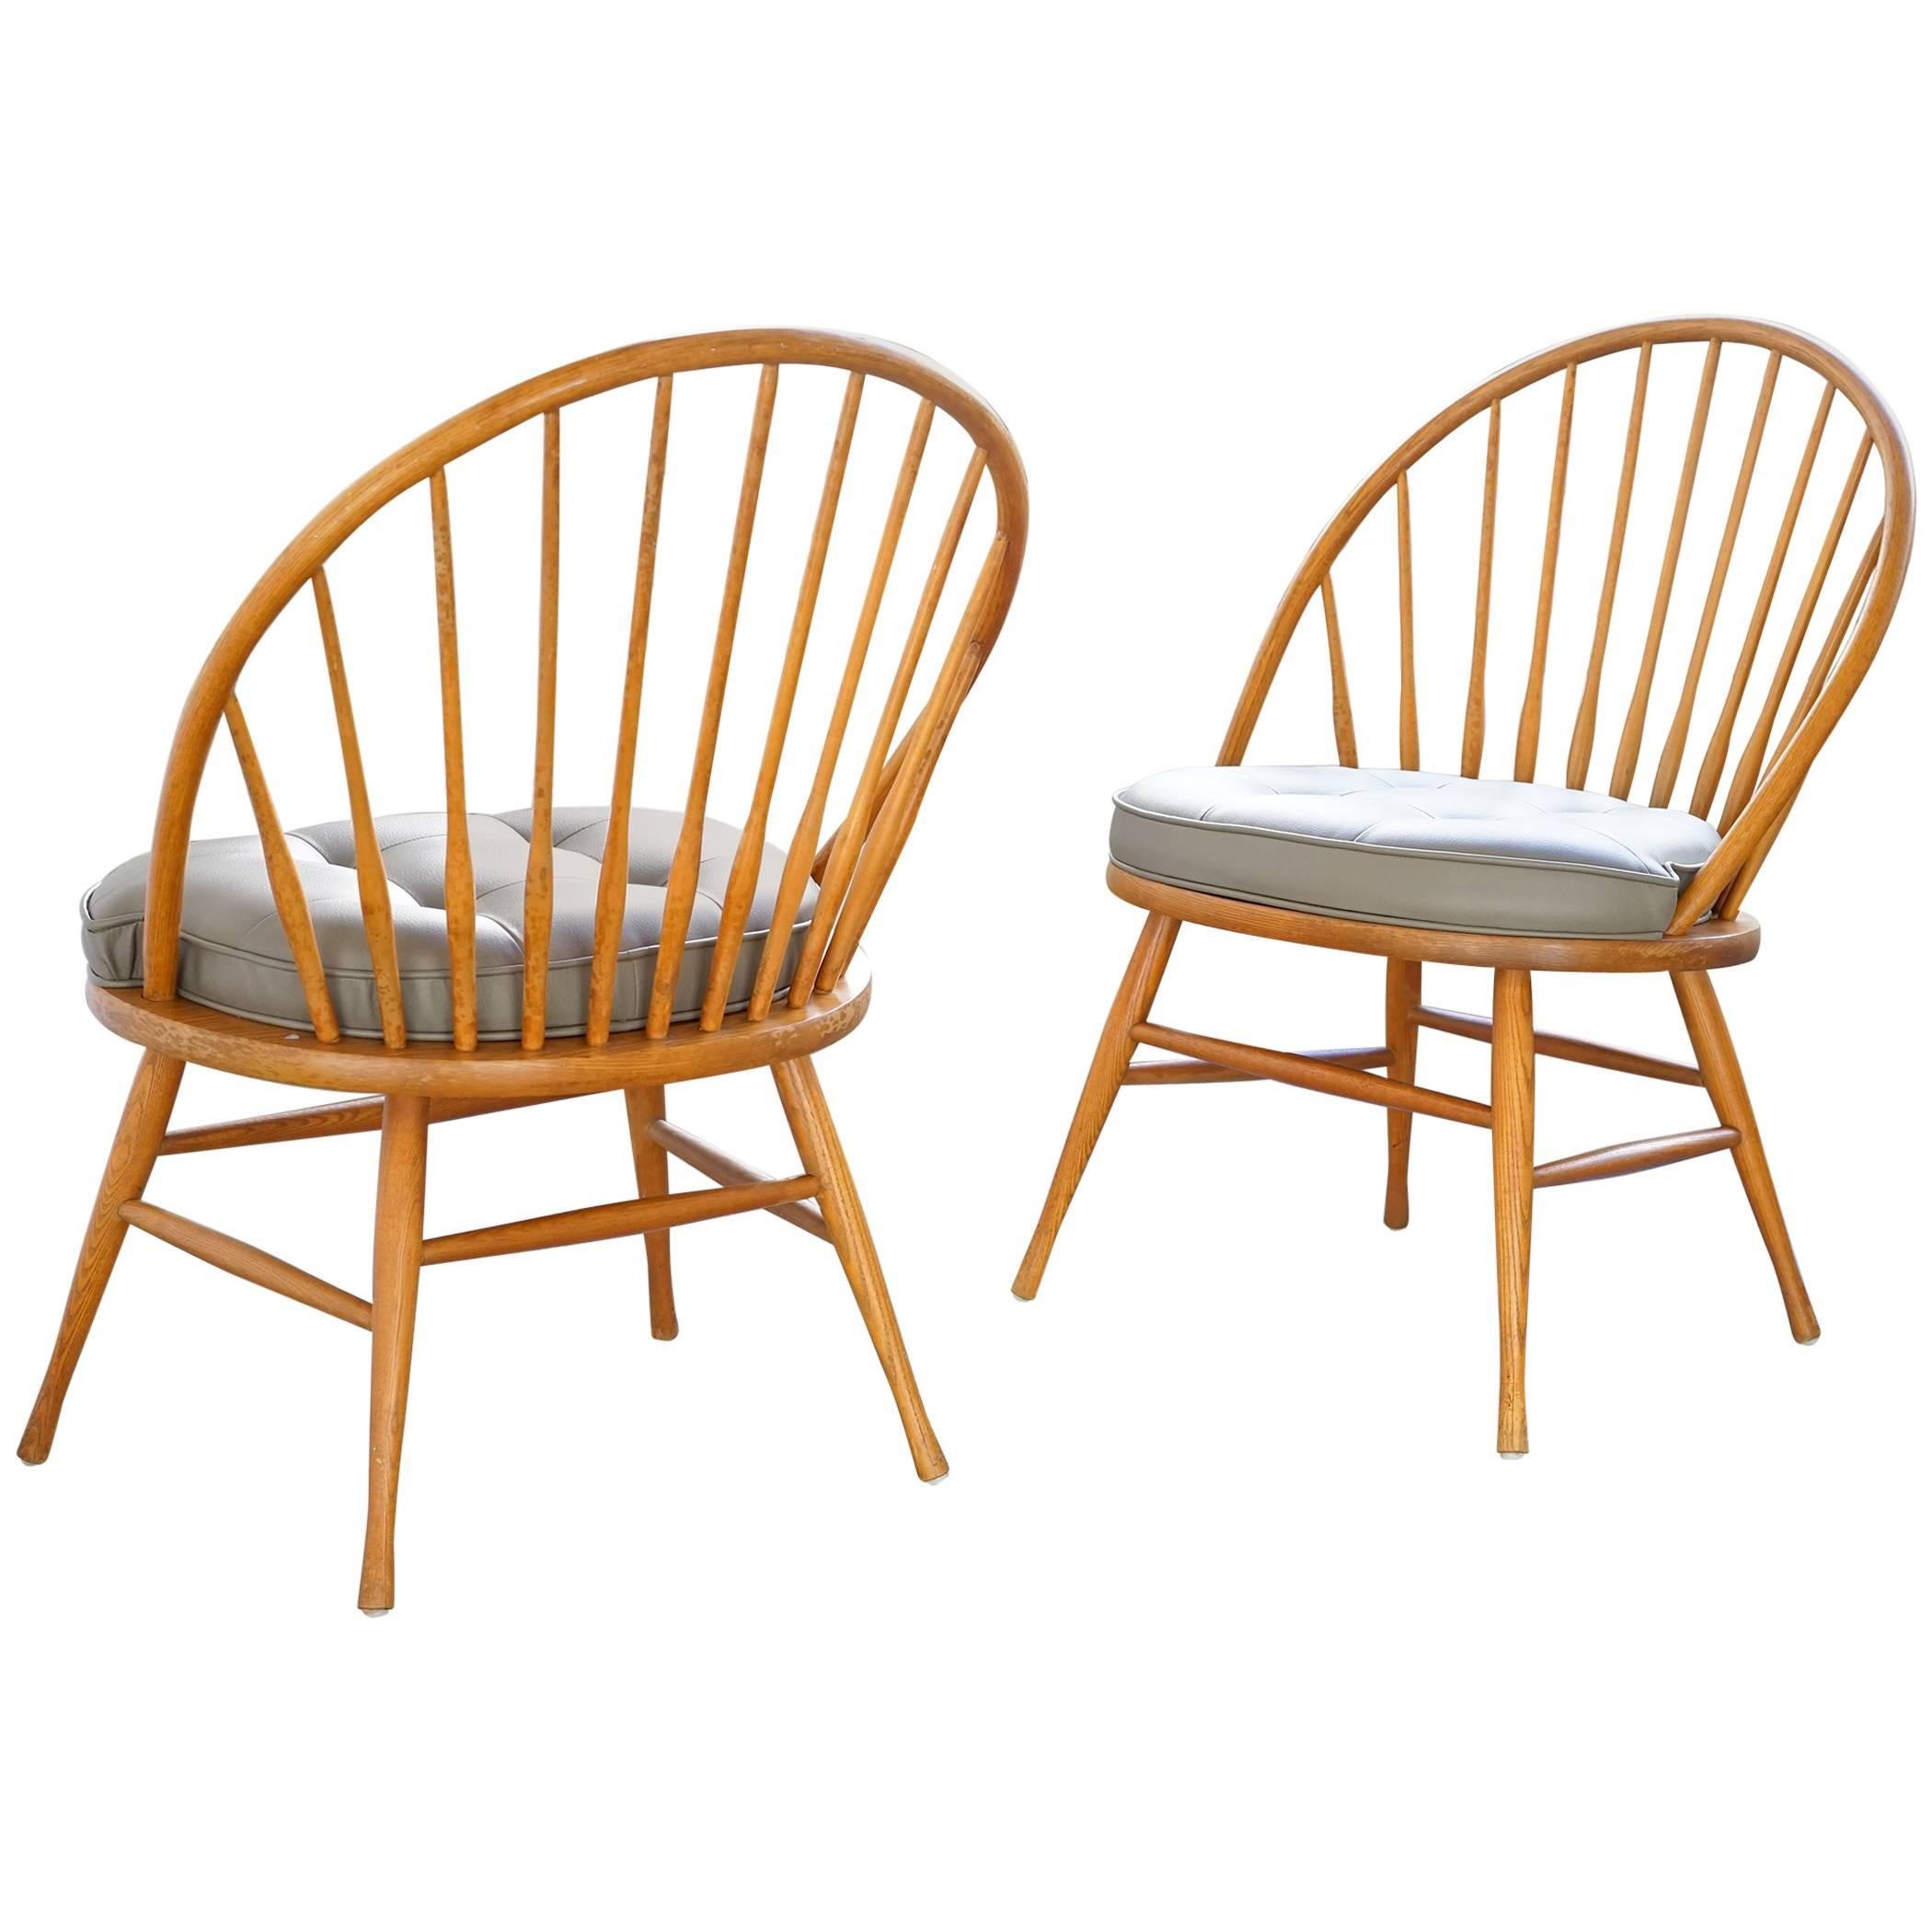 American Modern Windsor Chairs by Heywood Wakefield For Sale